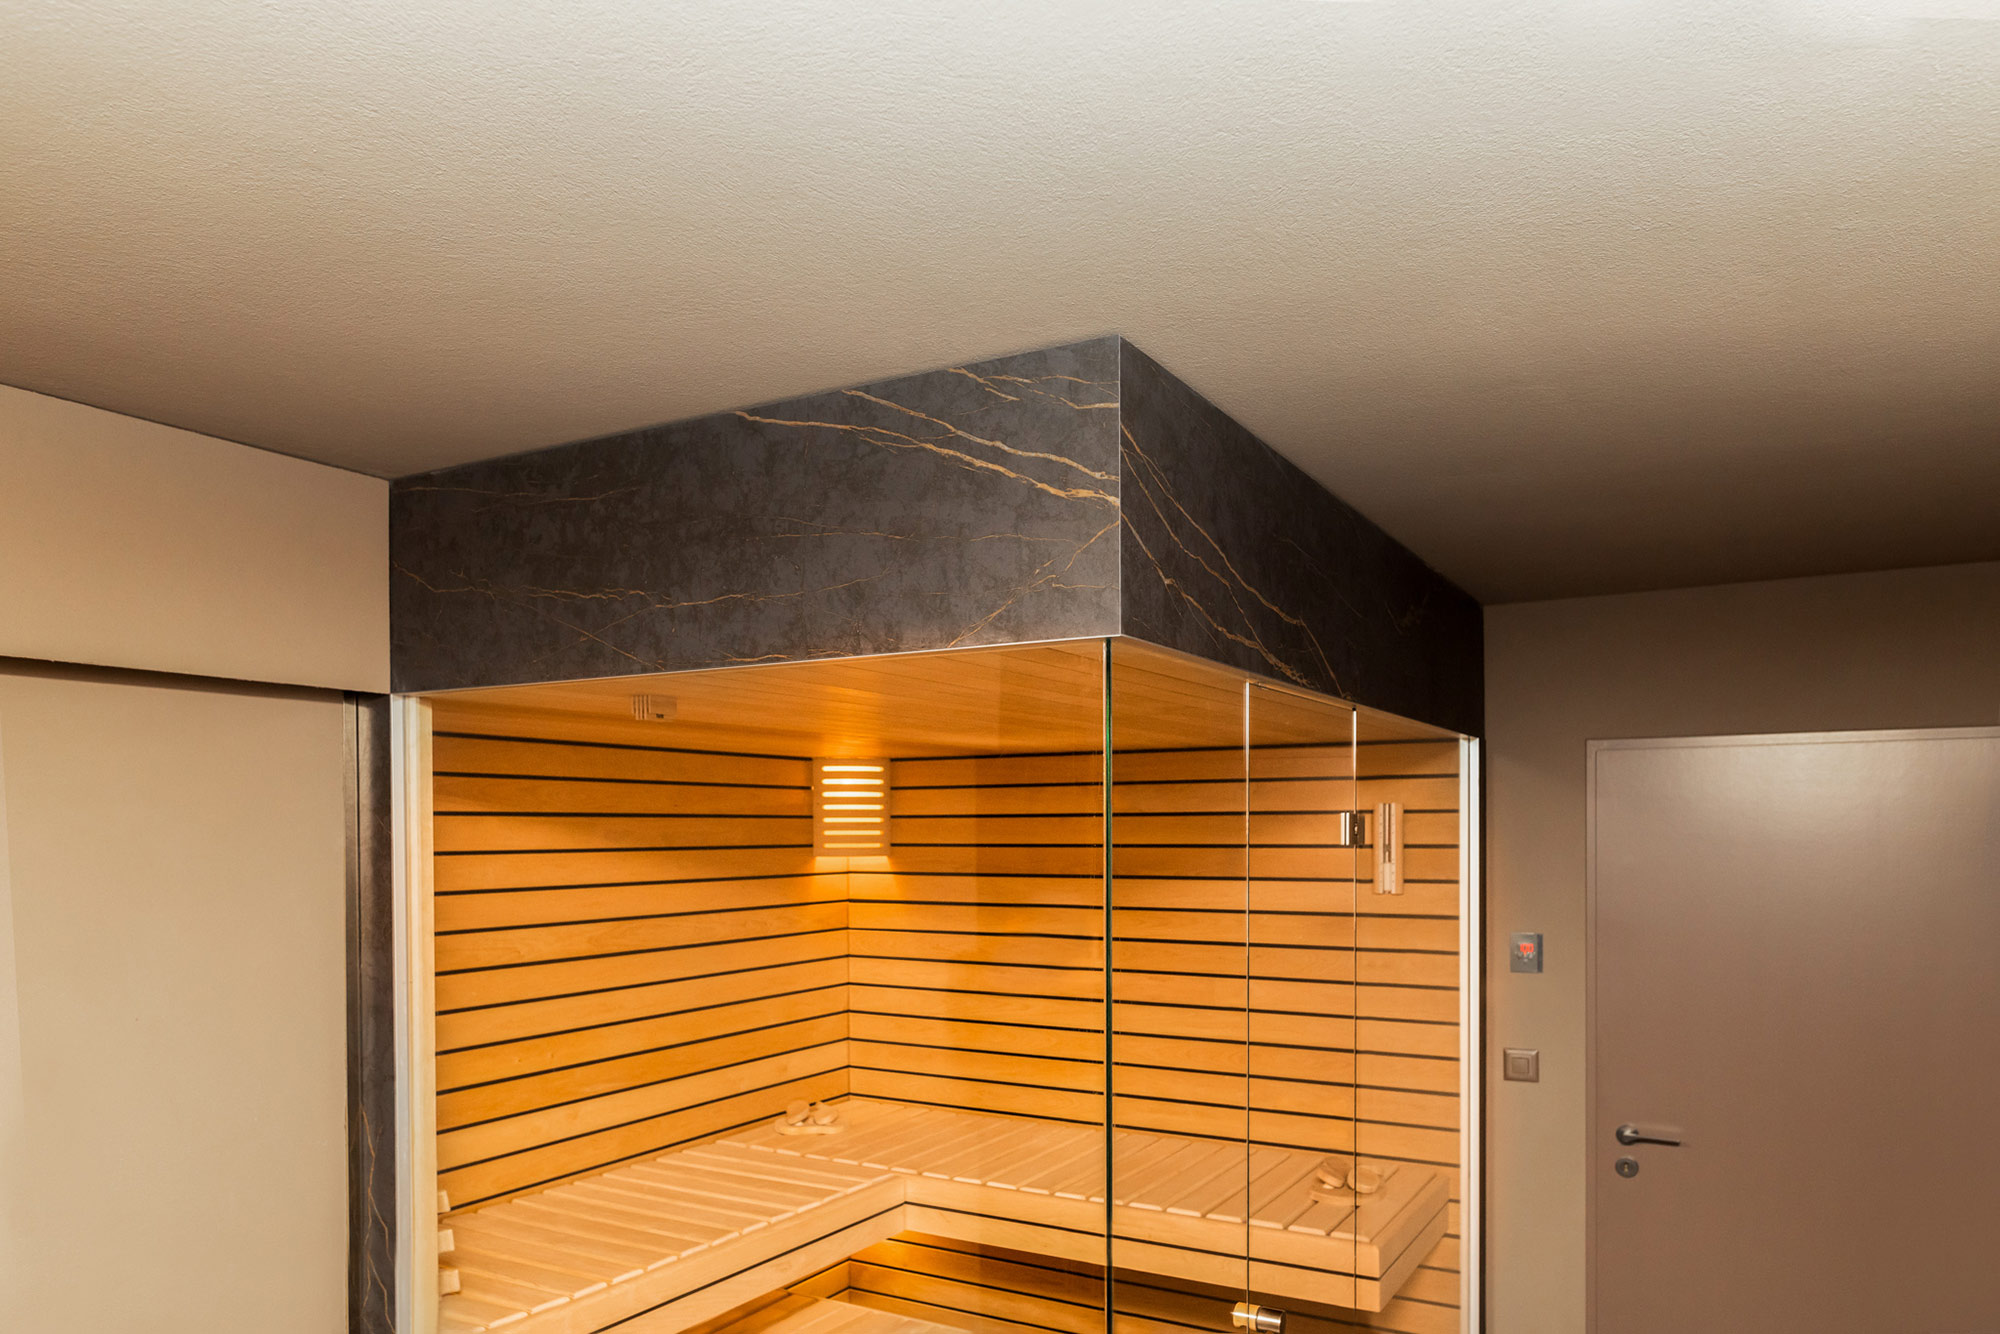 Image of sauna suiza laurent 2 in This sauna reaches its full wellness potential thanks to Dekton - Cosentino